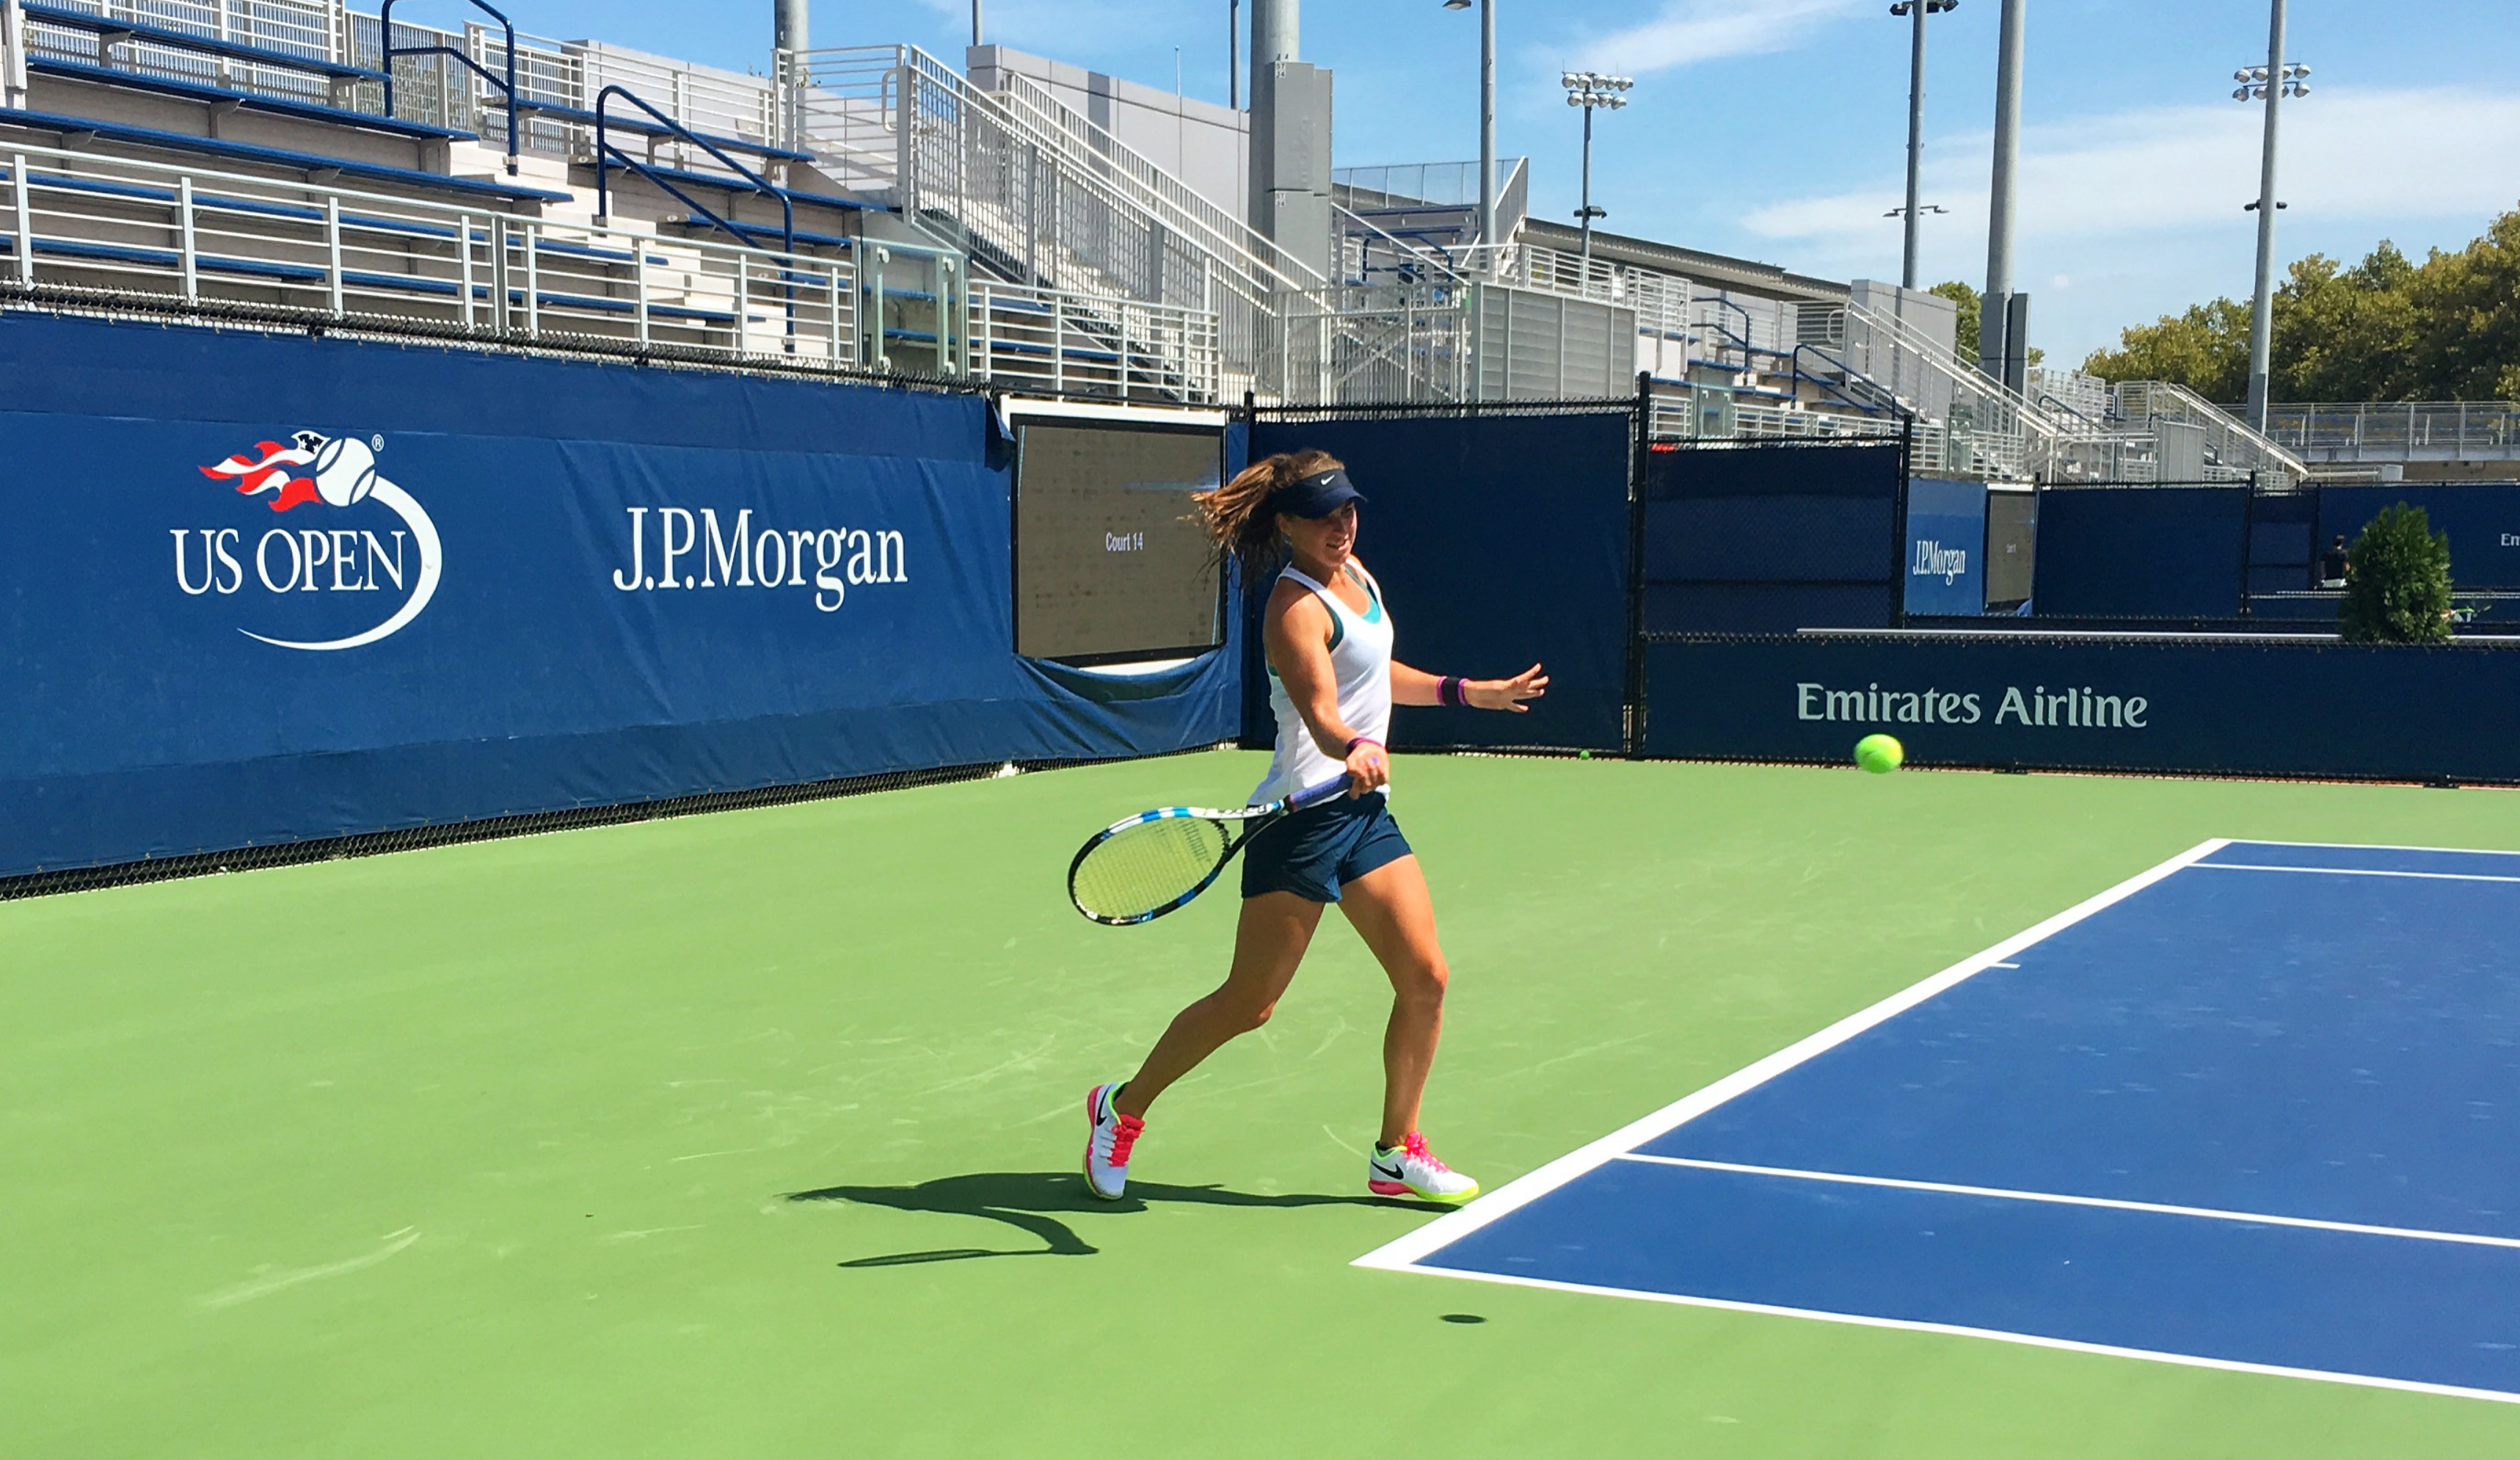 From severe injury to the U.S. Open in 6 months: Isokinetic shoulder rehab in tennis